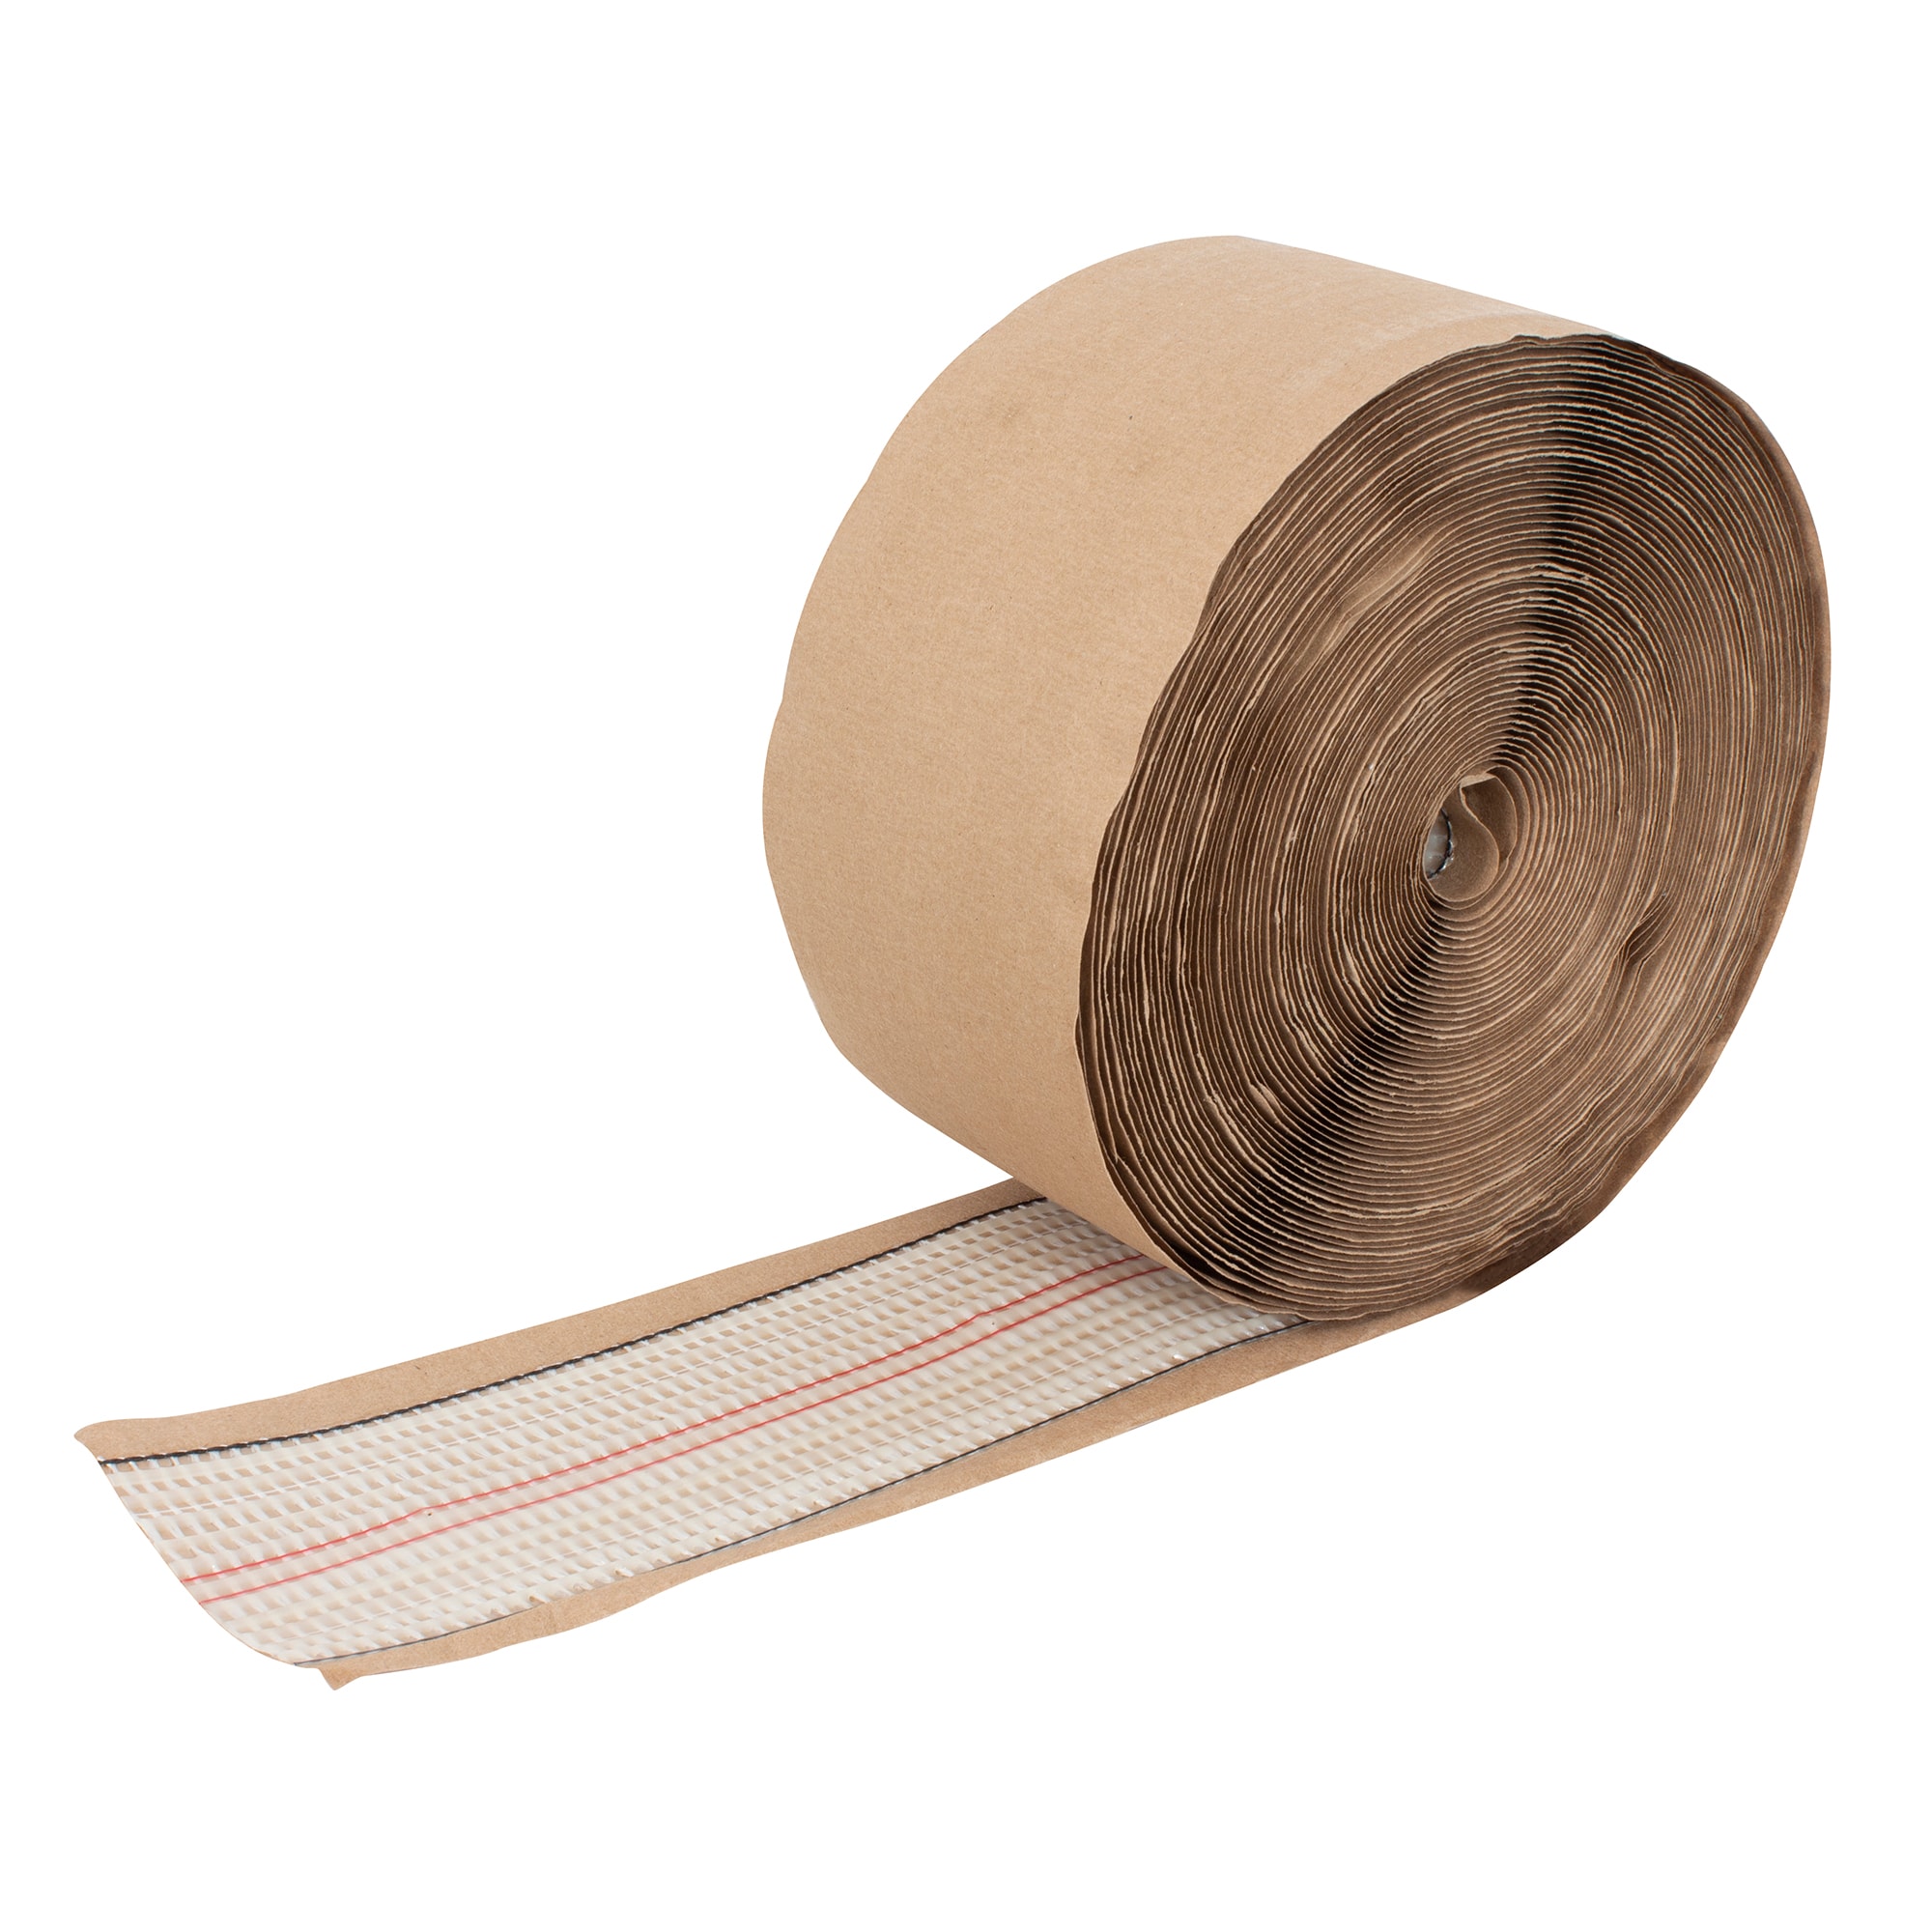 Lana's Fabric Cold Tape - Brown - 7/8